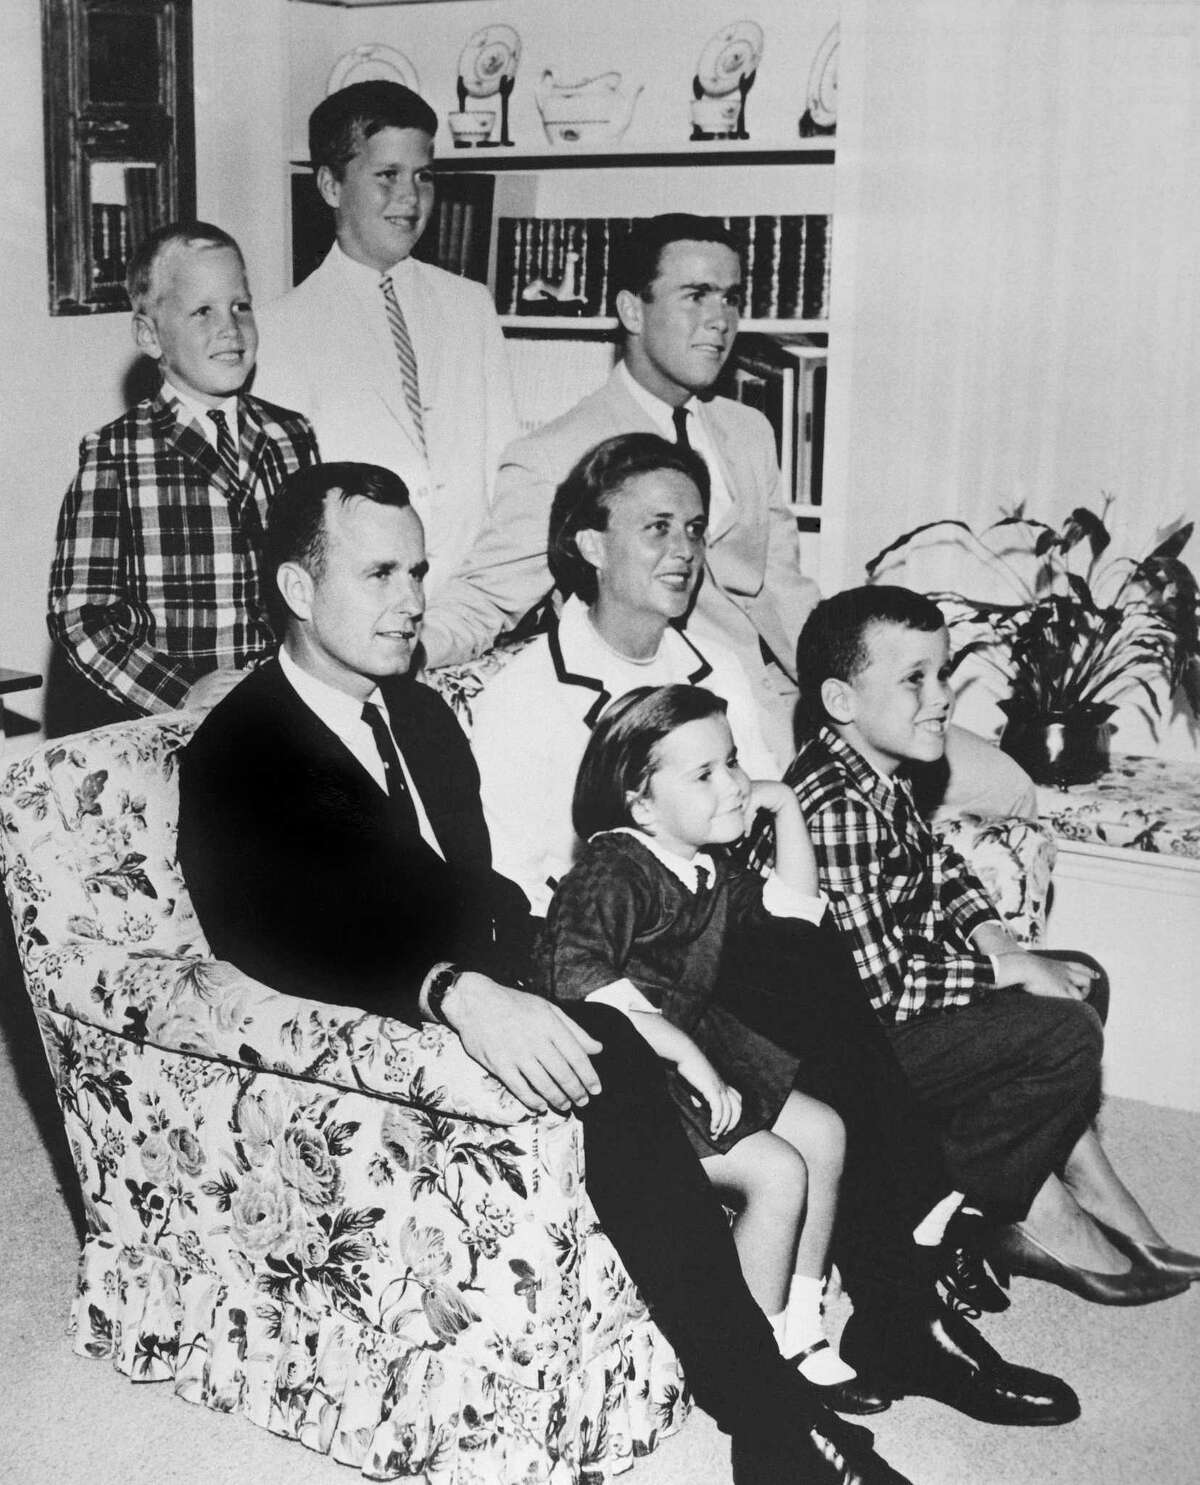 FILE - In this 1964 file photo, George H.W. Bush sits on couch with his wife, Barbara, and their children. George W. Bush sits at right behind his mother. Behind couch are Neil and Jeb Bush. Sitting with parents are Dorothy and Marvin Bush. A family spokesman said Tuesday, April 17, 2018, that former first lady Barbara Bush has died at the age of 92. (AP Photo/File)